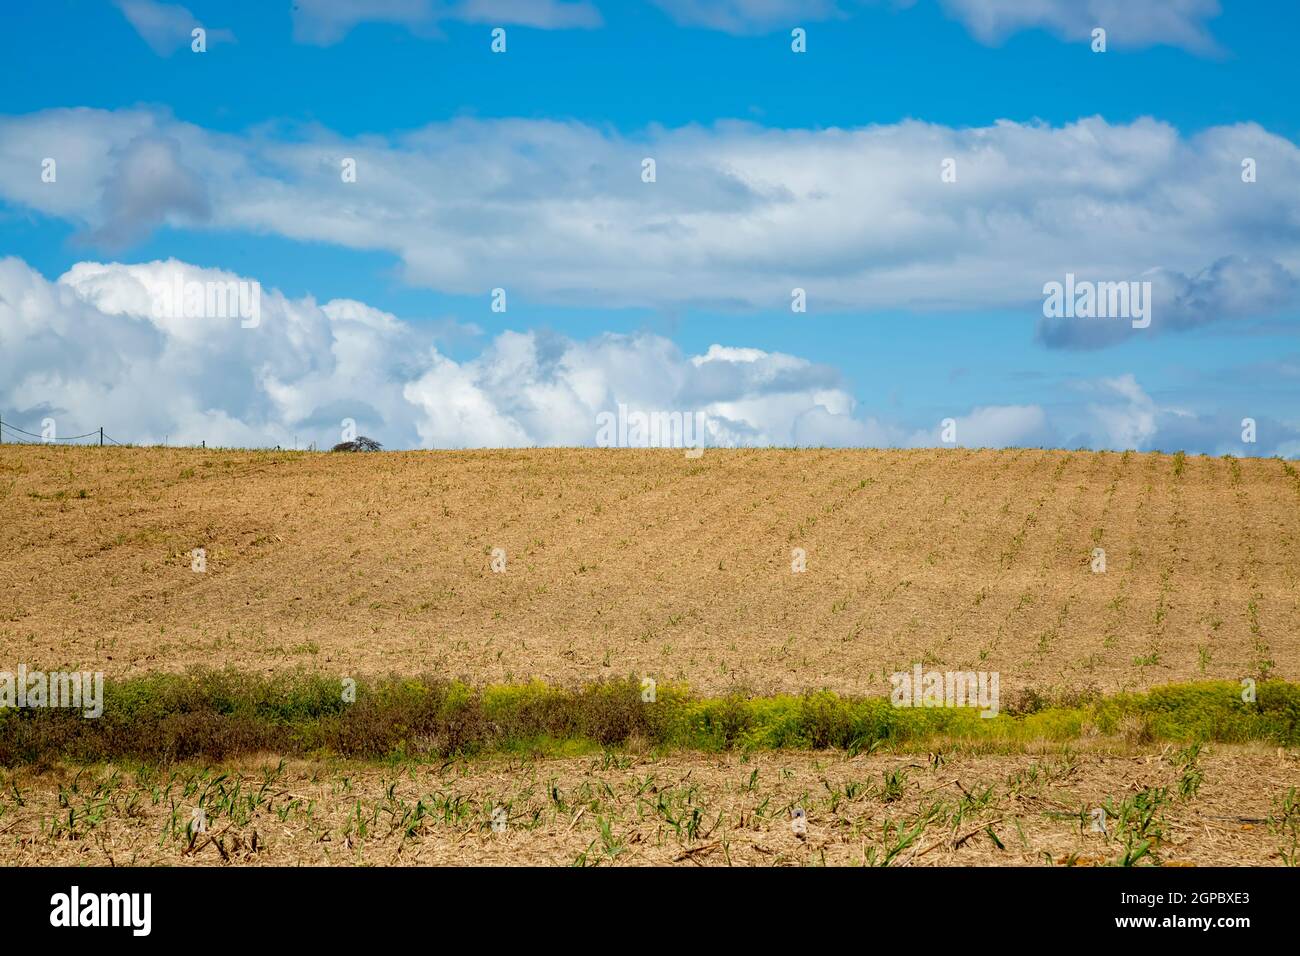 Harvested sugar cane field against blue cloudy sky. Stock Photo